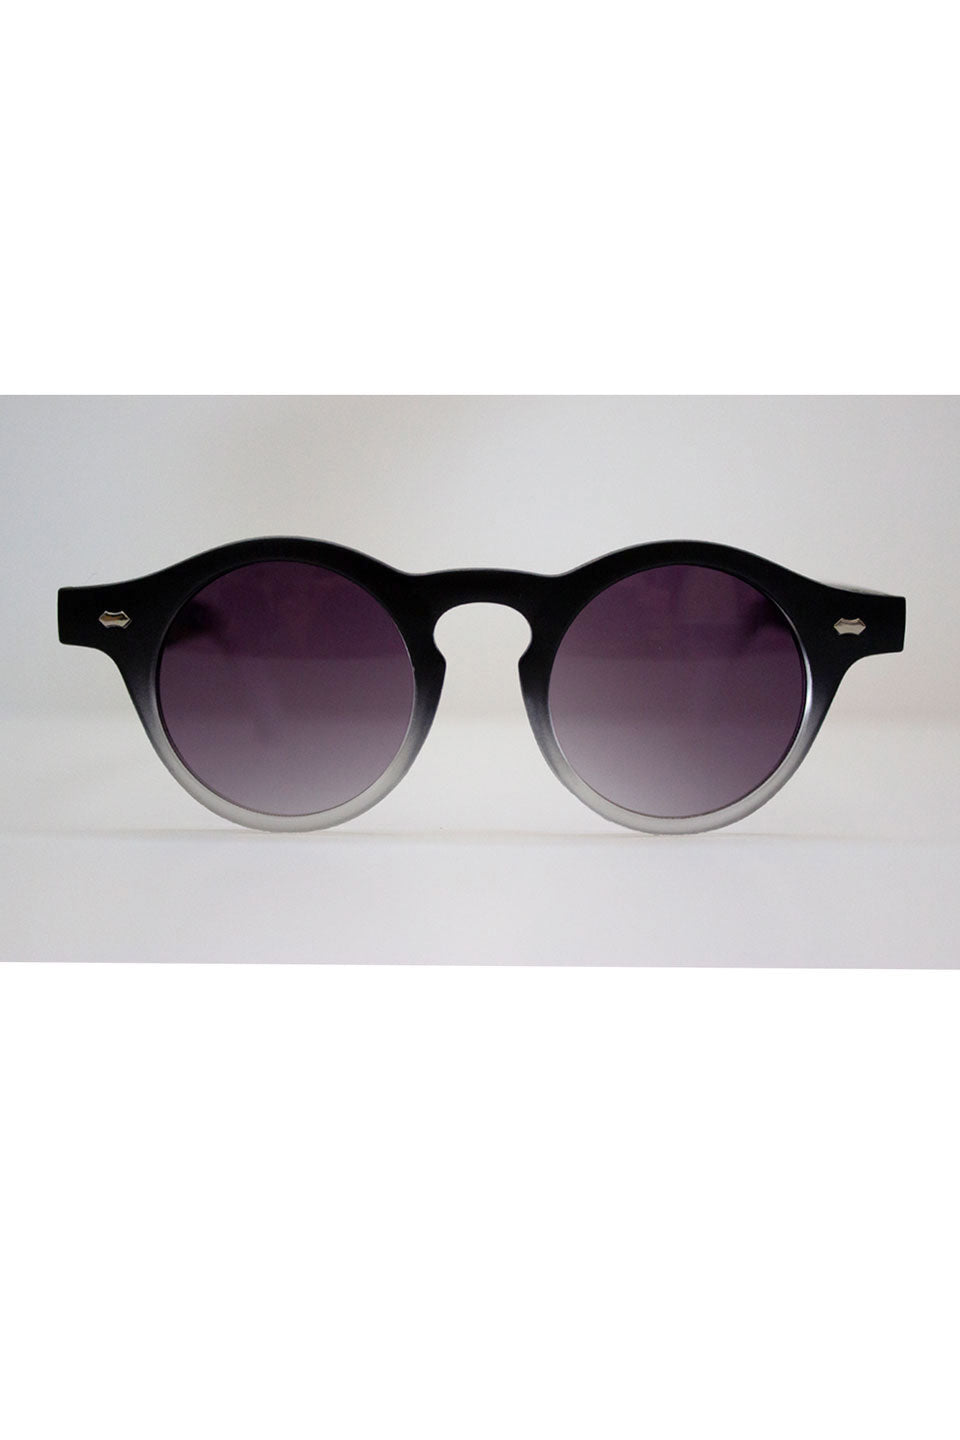  Round Black Sunglasses  |  1930s & 1940s Style | Weekend Doll